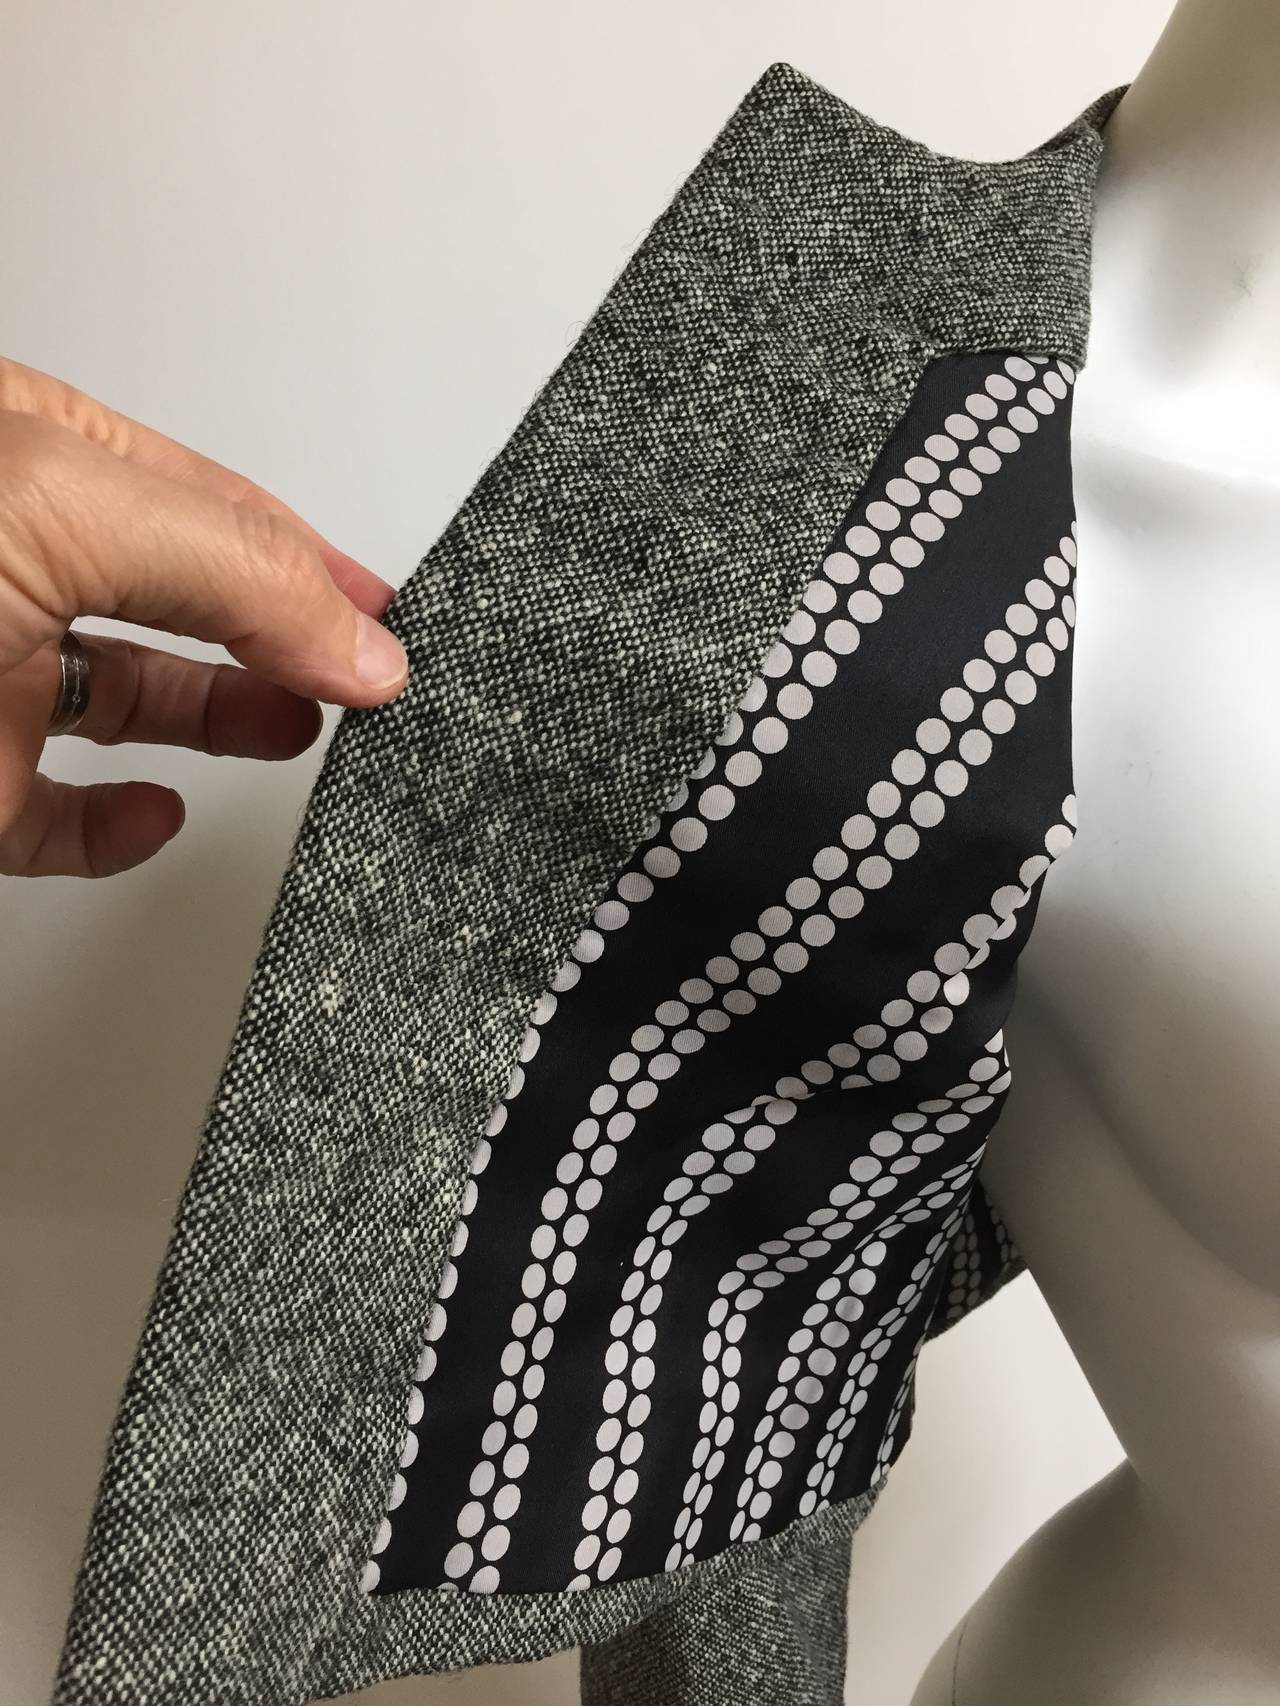 Pauline Trigere for Saks Fifth Avenue 1960s gray wool cropped jacket will fit a USA size 6. Lined with a modern repetitive pattern that when flashed open will make everyone smile. Pauline Trigere knew exactly how to design timeless pieces and this